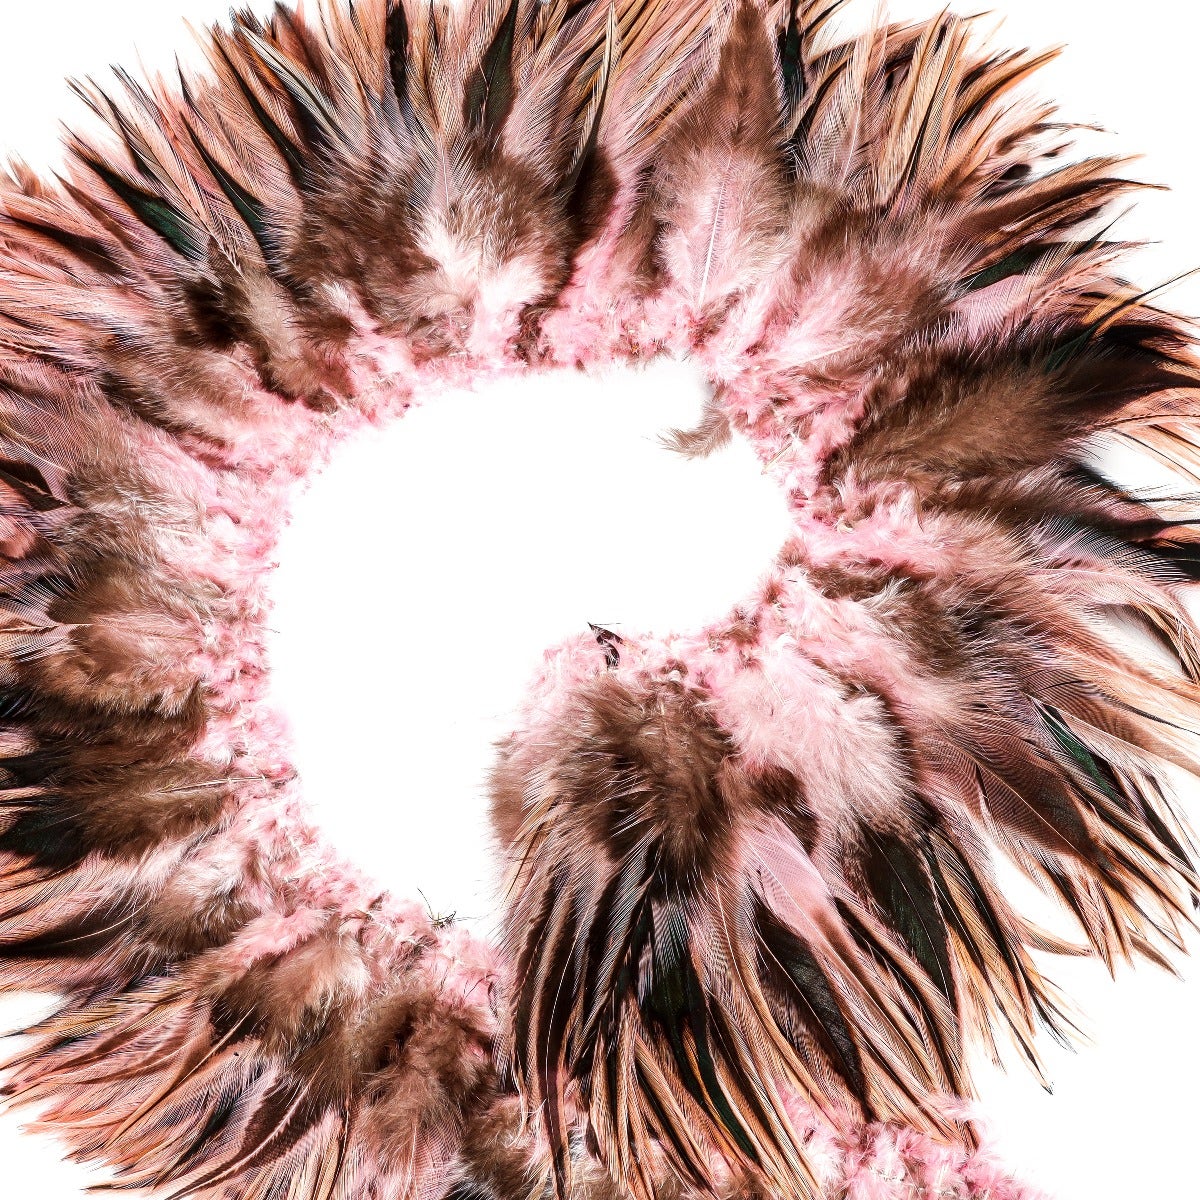 Badger Rooster Saddle Feathers Strung - 1 Yard 4-6" Rooster Feathers - Candy Pink